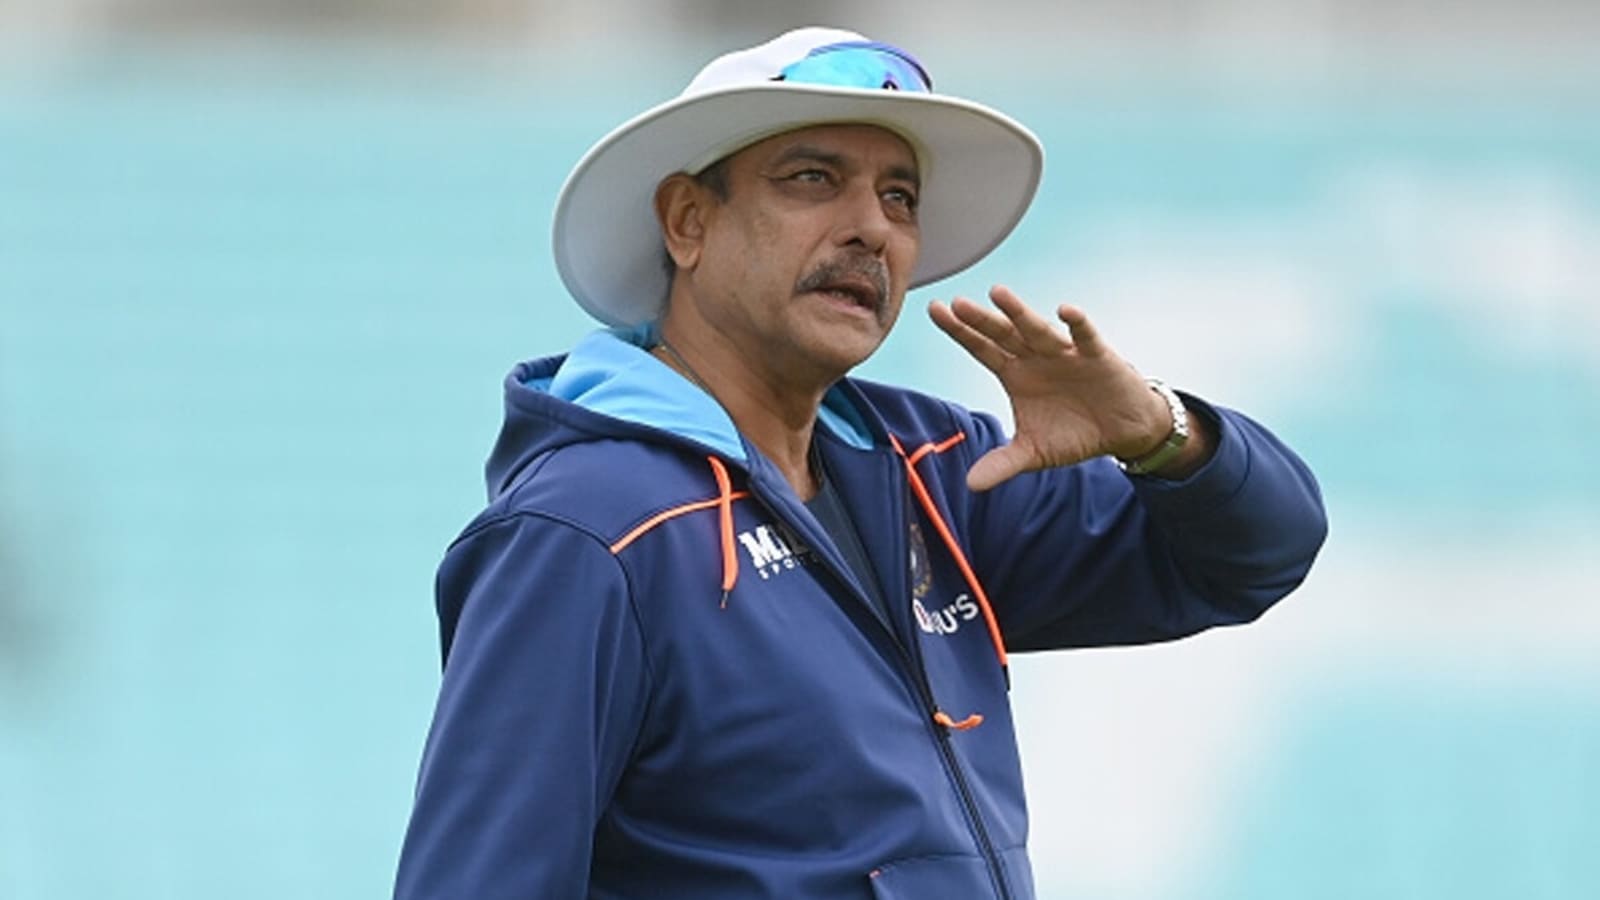 Cricket Sports: Ravi Shastri says “What was the logic in having Dhoni, Rishabh and Dinesh all together?”